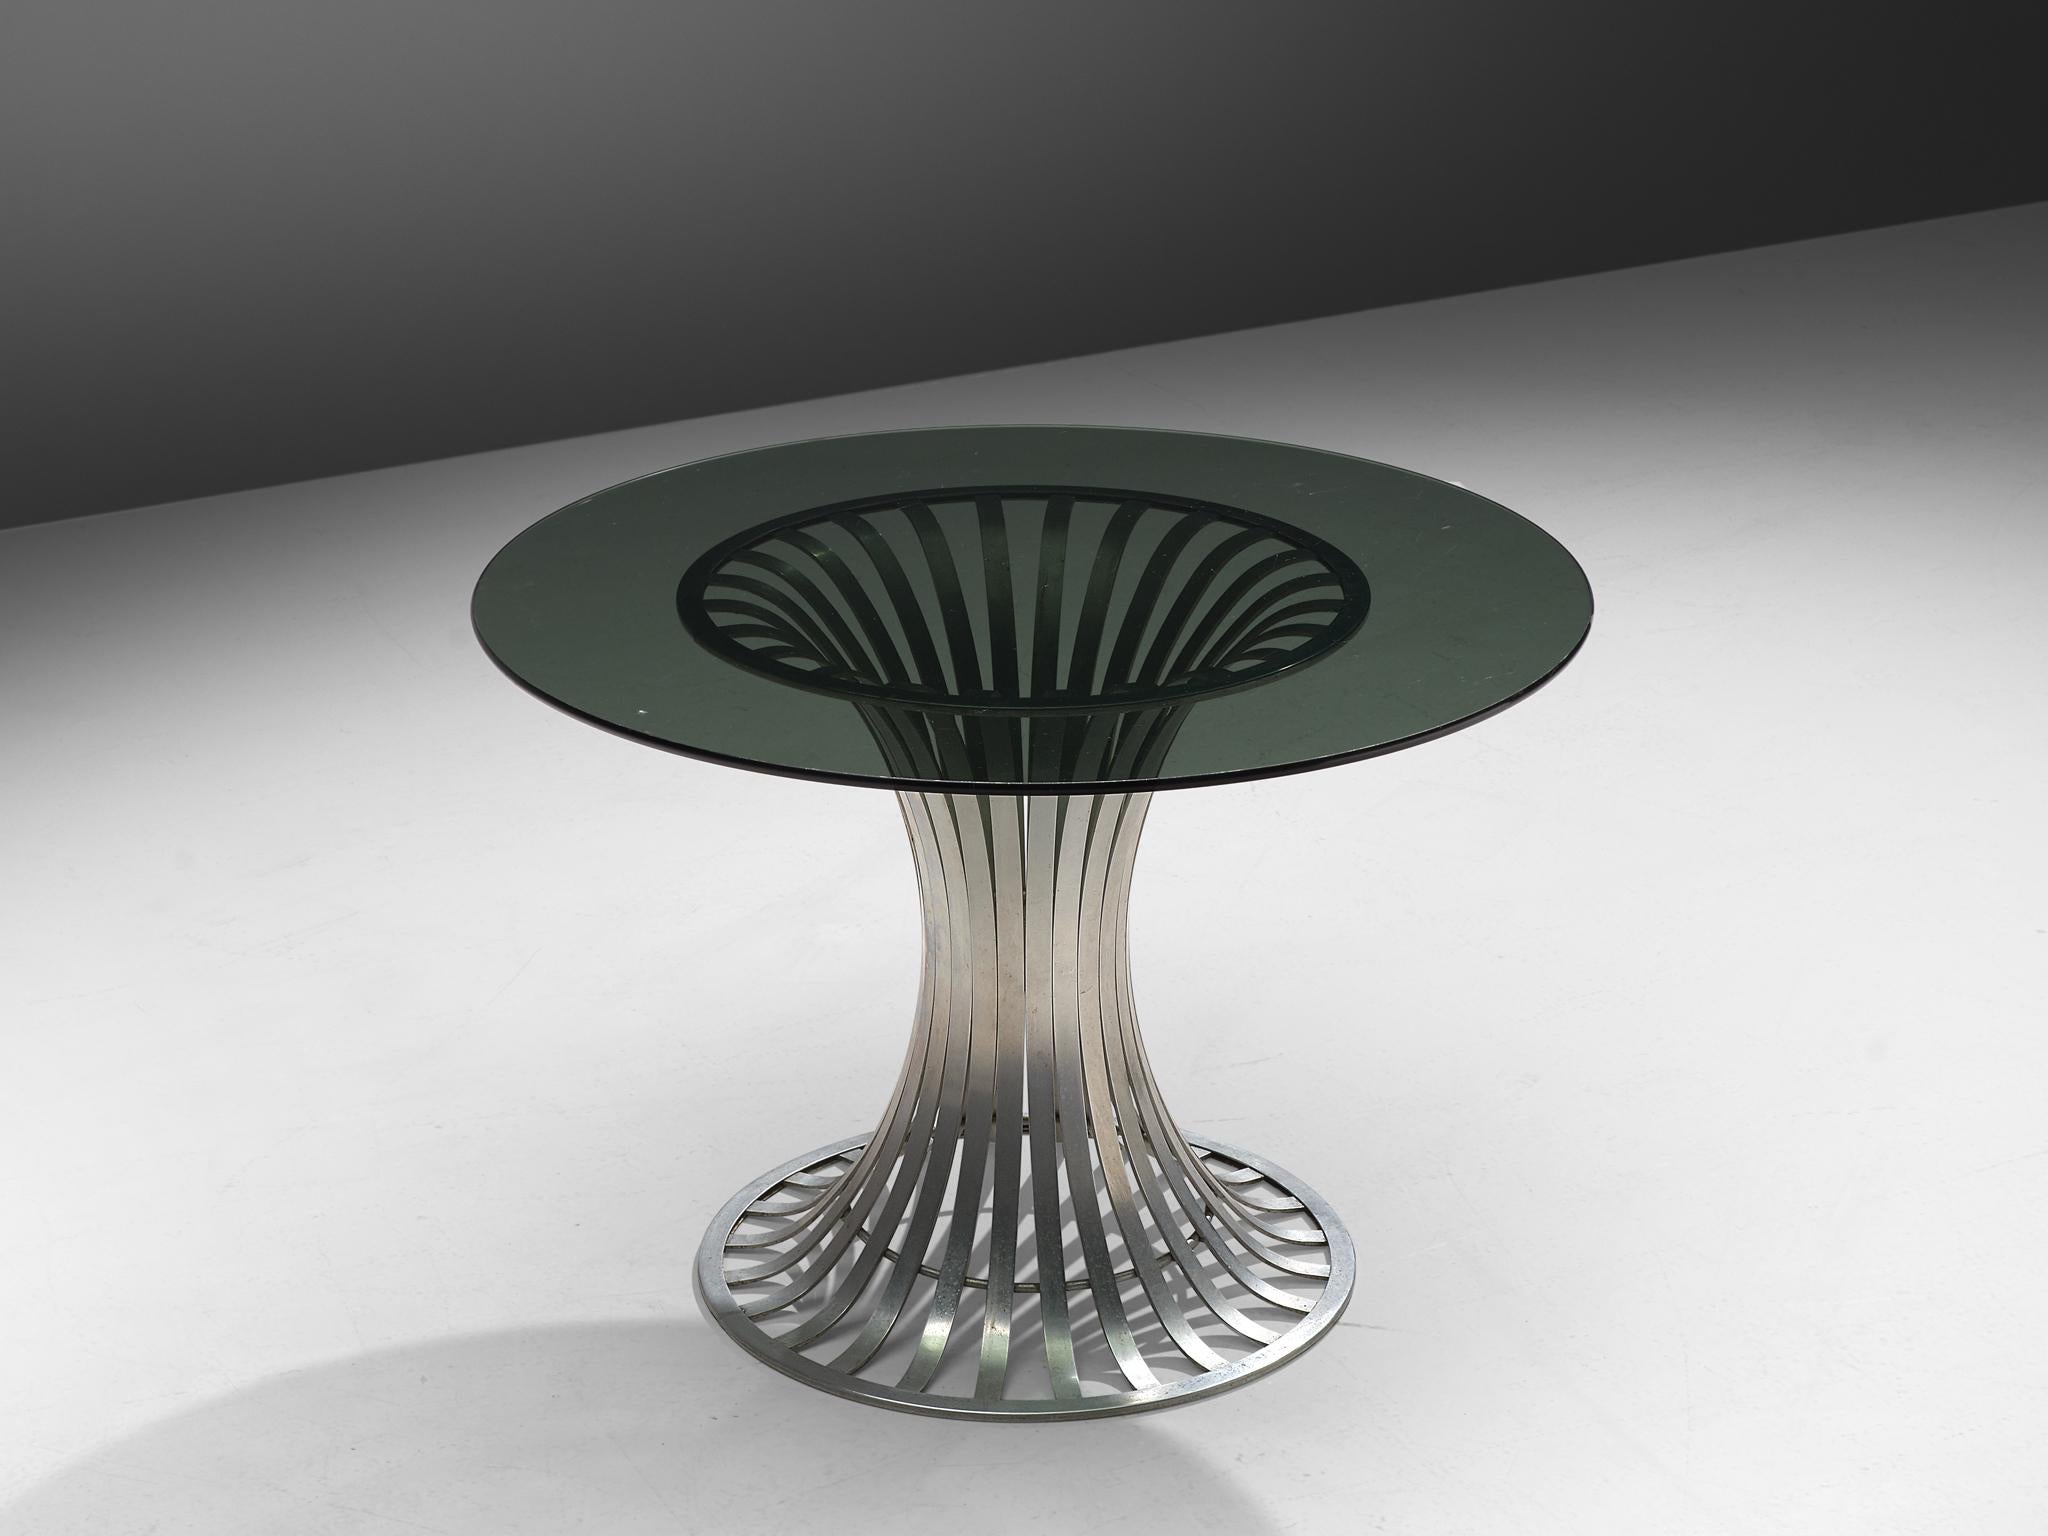 Russell Woodard for Woodard Furniture Company, round dining table, aluminum, glass, United States, 1960s

Russell Woodard designed this table for the Woodard Furniture Company. Originally intended as an outdoor patio set, it fits an indoor setting